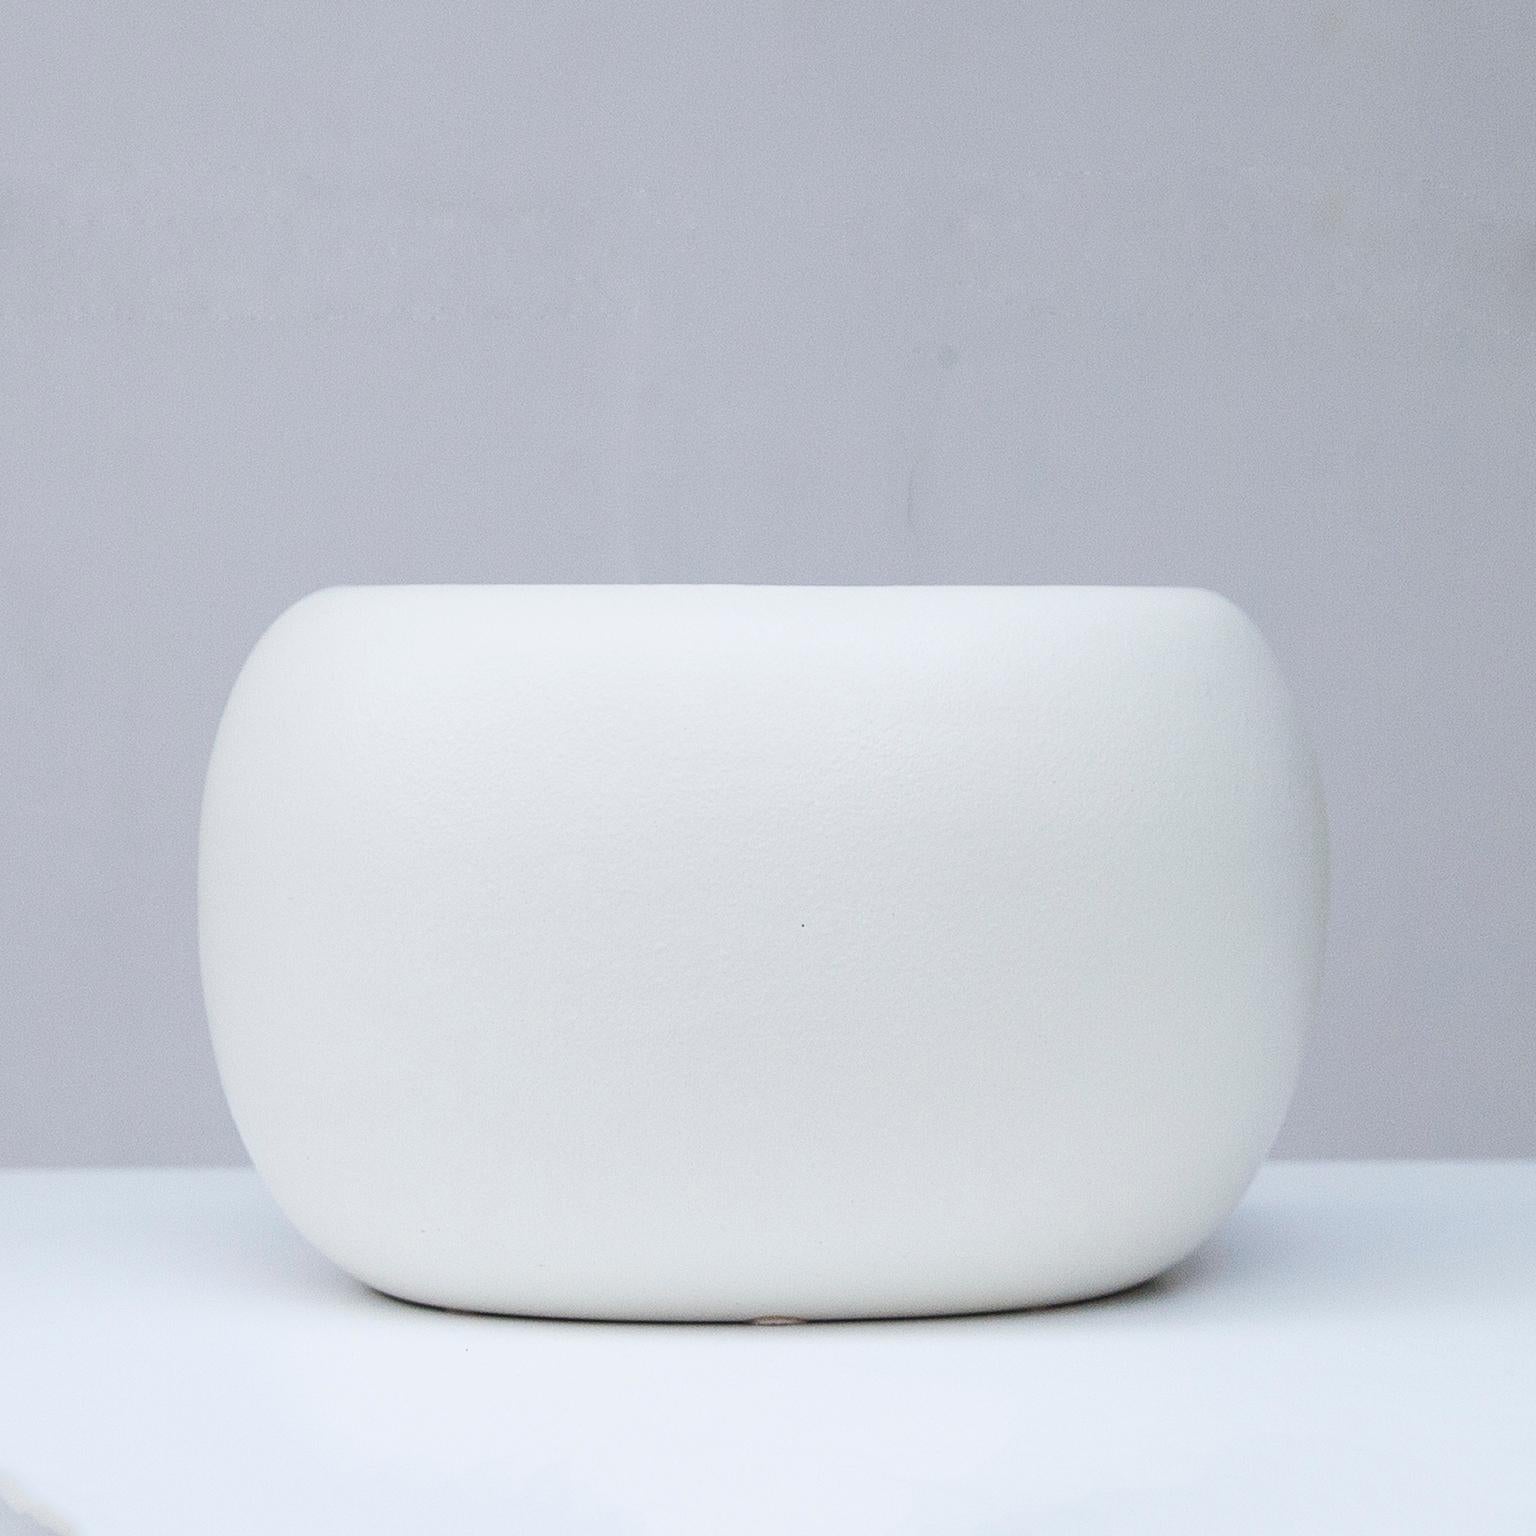 Beautifully shaped, these matte white ceramic was designed by Tom Ford for the Gucci store in Florence 1994. Signed Gucci and Made in Italy. A must have for every fashionista.